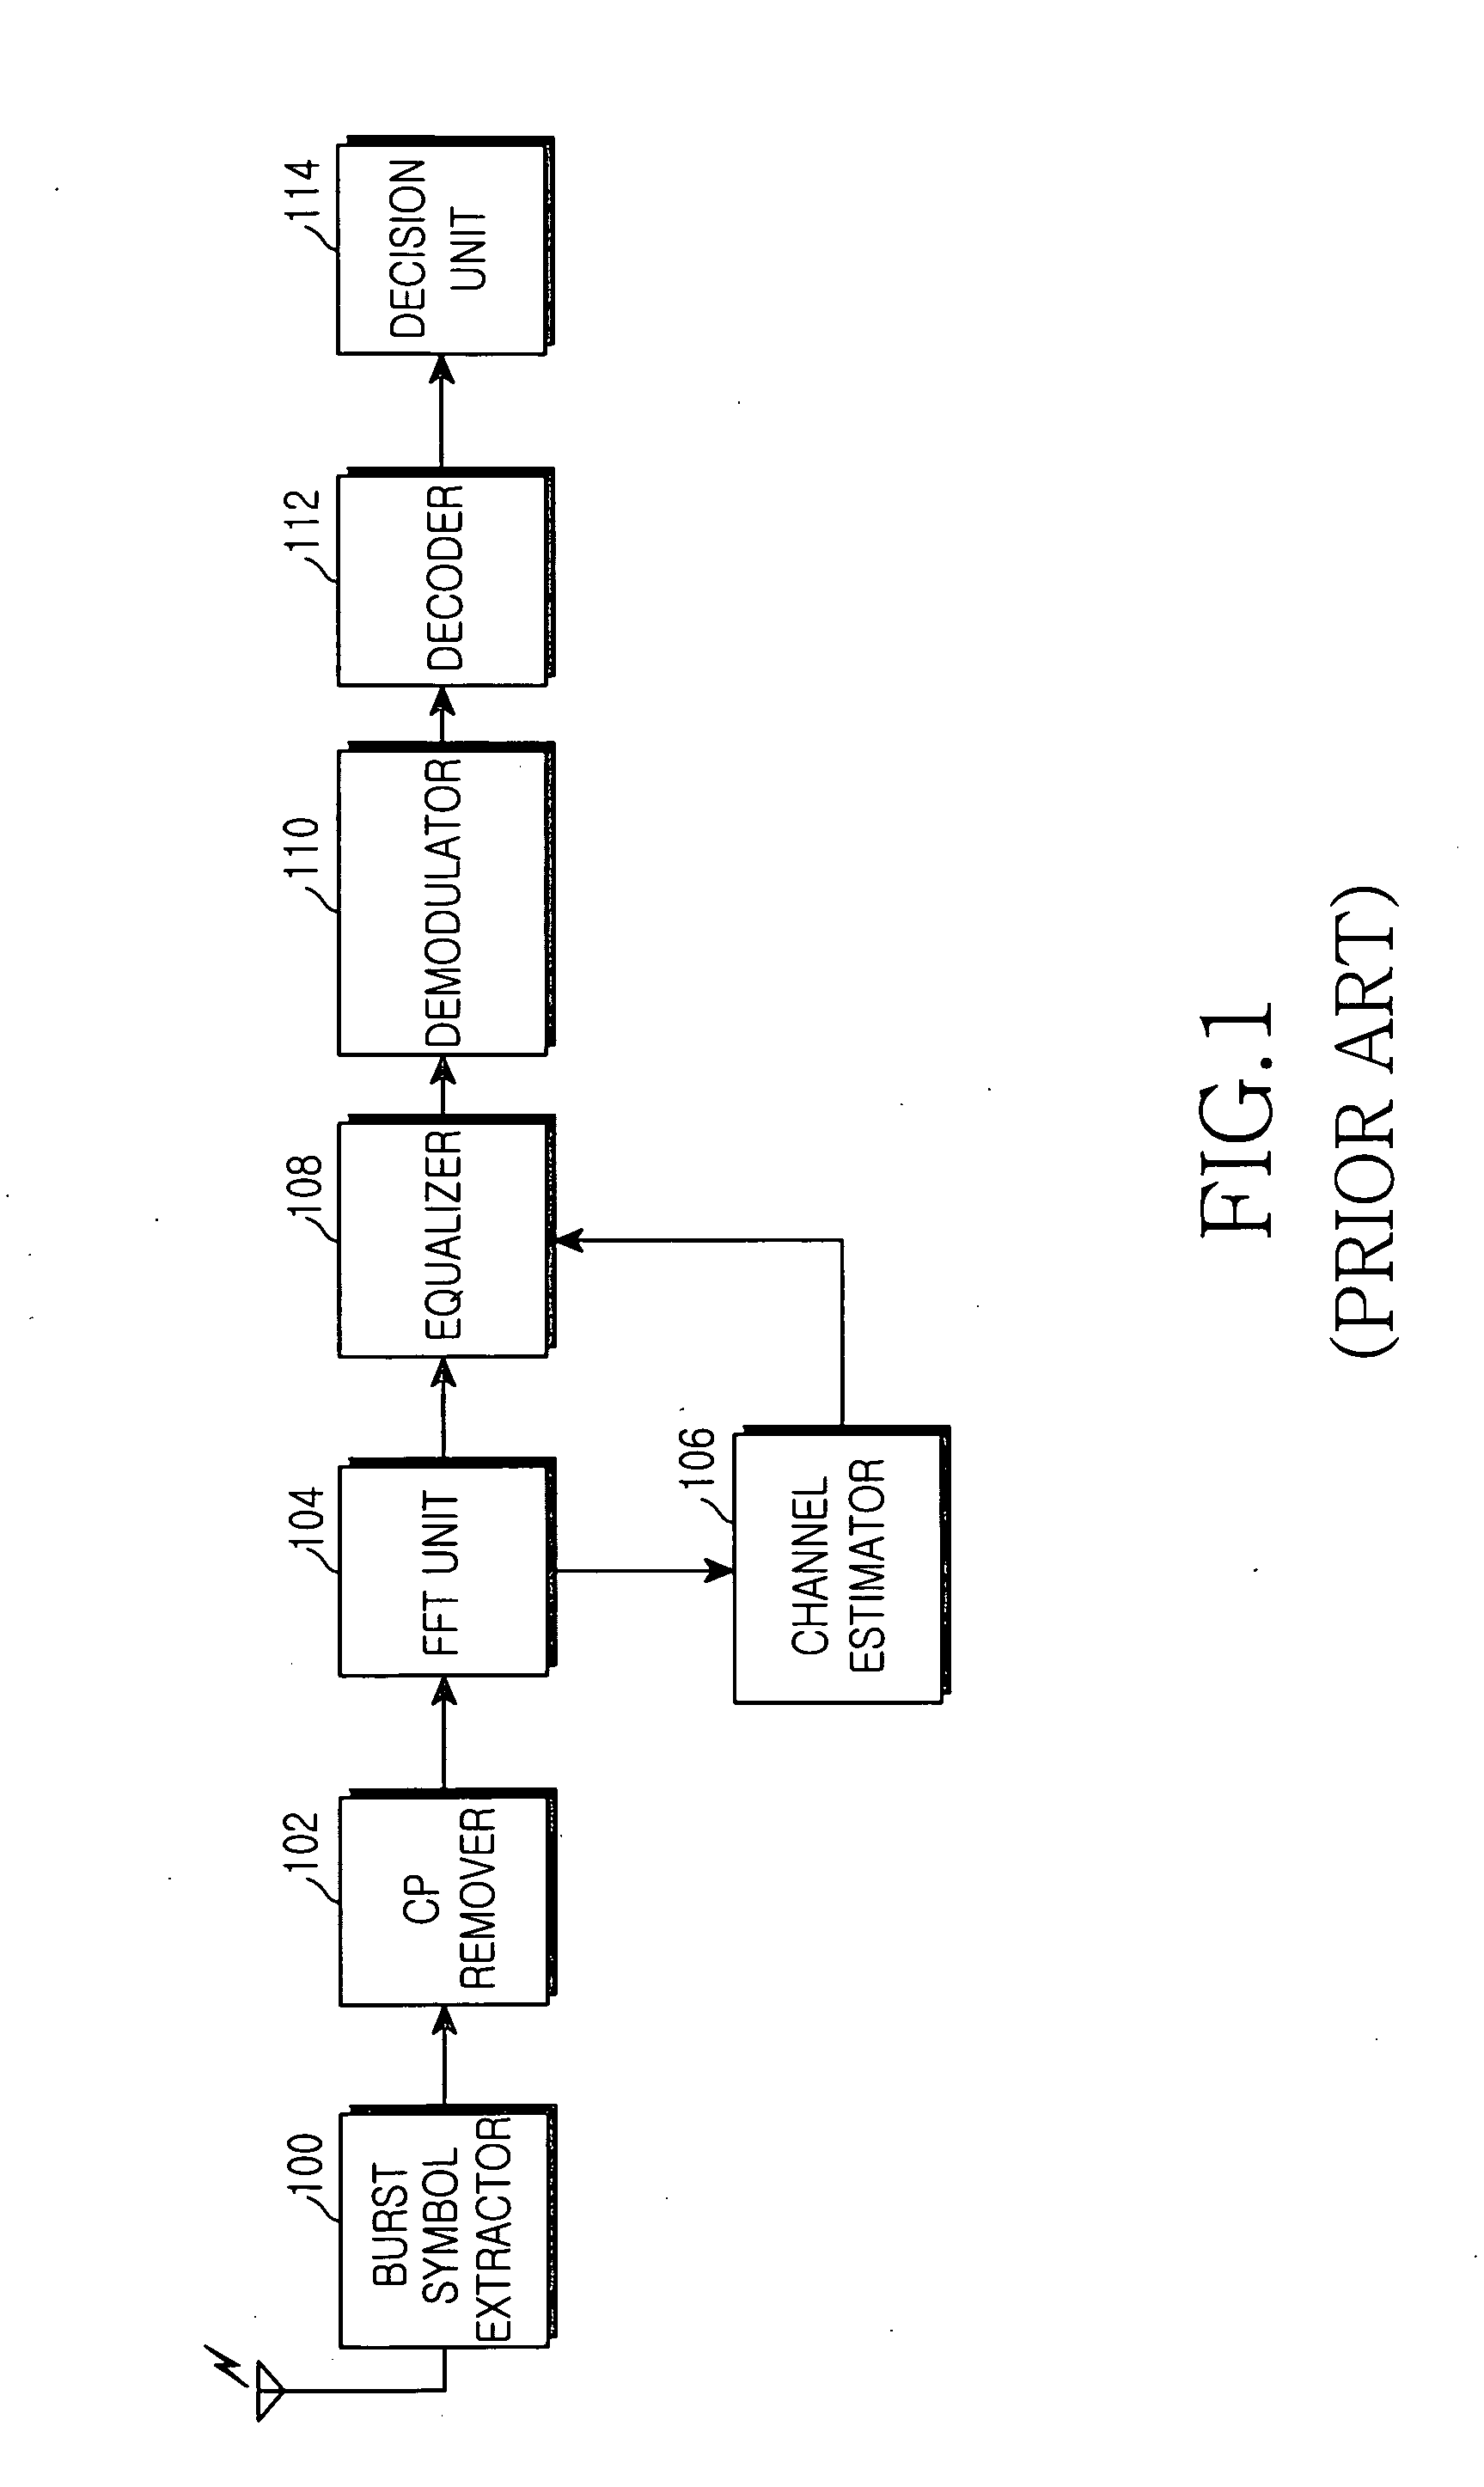 Channel estimation apparatus and method for OFDM/OFDMA receiver